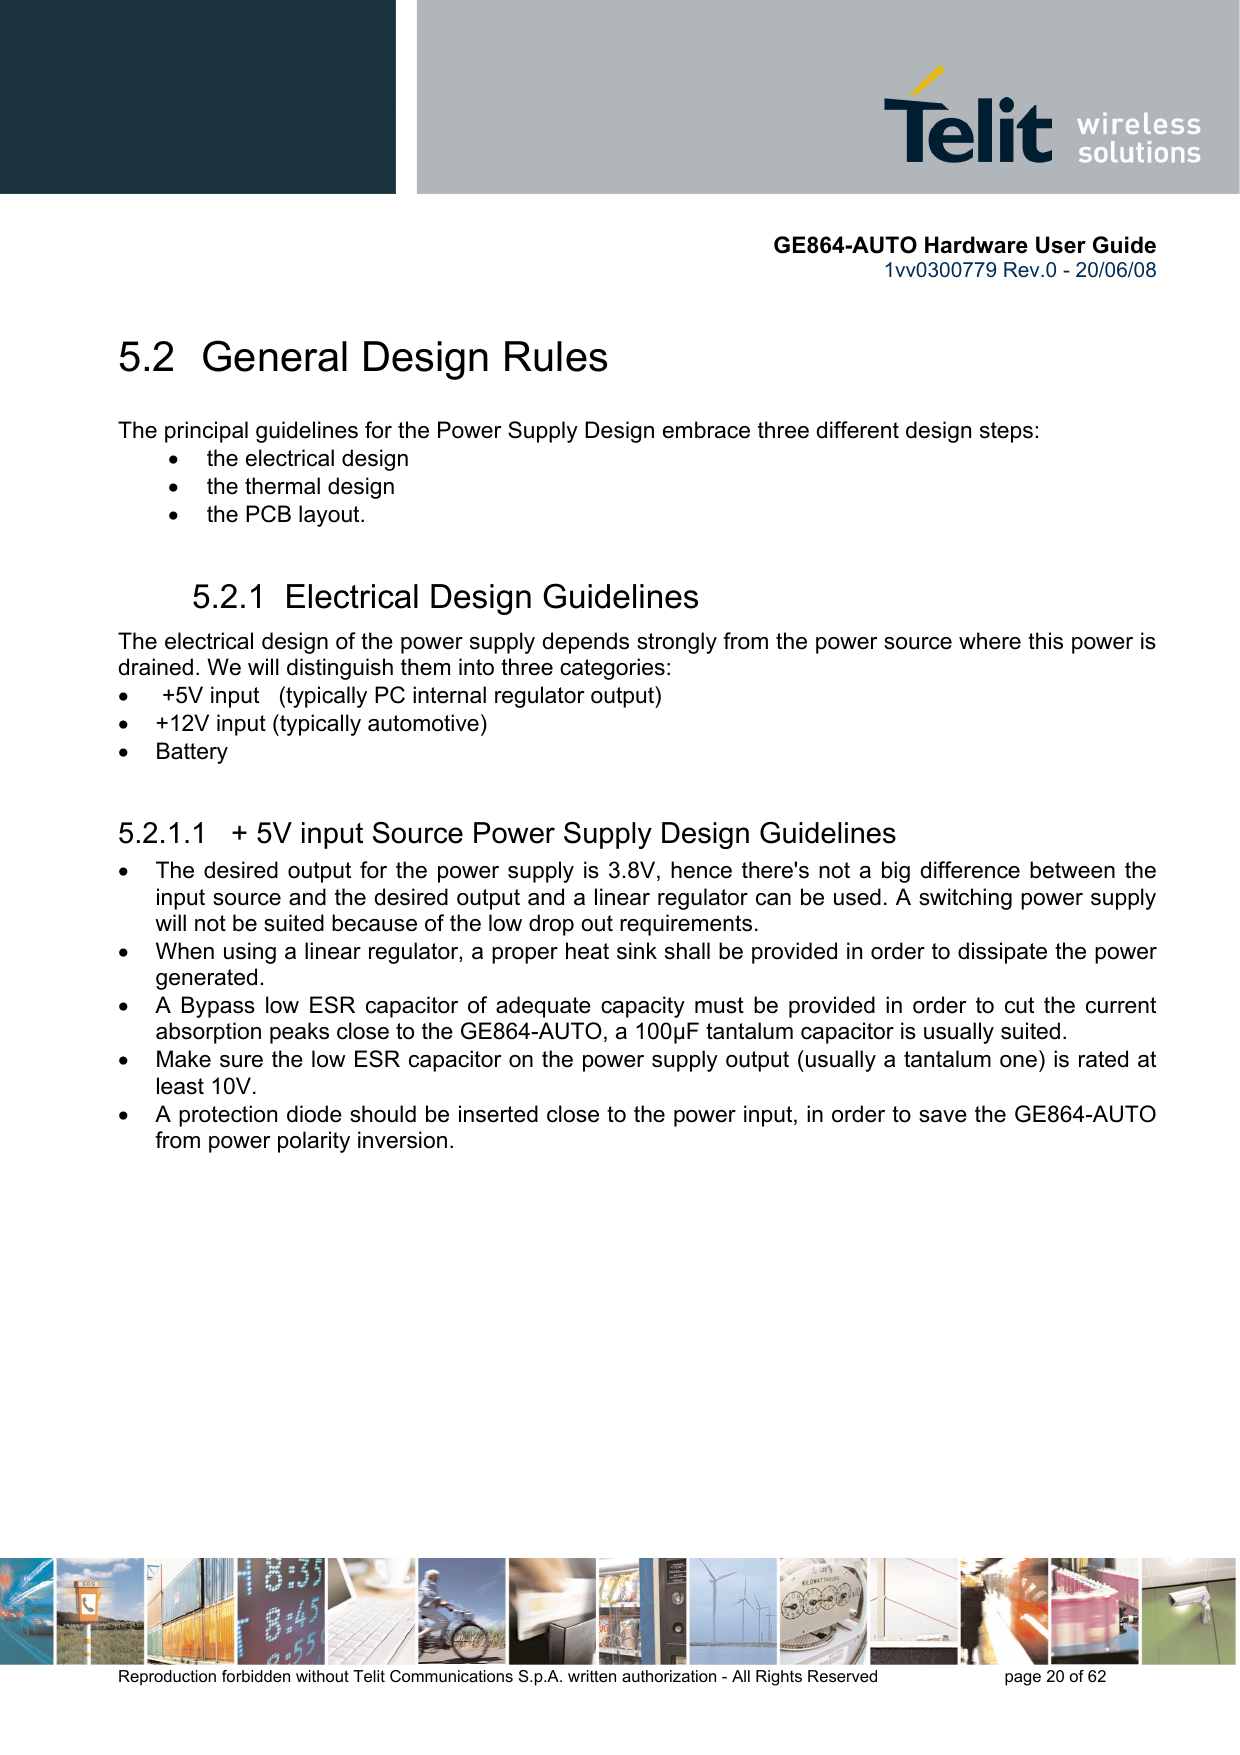       GE864-AUTO Hardware User Guide 1vv0300779 Rev.0 - 20/06/08      Reproduction forbidden without Telit Communications S.p.A. written authorization - All Rights Reserved    page 20 of 62  5.2  General Design Rules The principal guidelines for the Power Supply Design embrace three different design steps: •  the electrical design •  the thermal design •  the PCB layout. 5.2.1  Electrical Design Guidelines The electrical design of the power supply depends strongly from the power source where this power is drained. We will distinguish them into three categories: •   +5V input   (typically PC internal regulator output) •  +12V input (typically automotive) • Battery  5.2.1.1   + 5V input Source Power Supply Design Guidelines •  The desired output for the power supply is 3.8V, hence there&apos;s not a big difference between the input source and the desired output and a linear regulator can be used. A switching power supply will not be suited because of the low drop out requirements. •  When using a linear regulator, a proper heat sink shall be provided in order to dissipate the power generated. •  A Bypass low ESR capacitor of adequate capacity must be provided in order to cut the current absorption peaks close to the GE864-AUTO, a 100μF tantalum capacitor is usually suited. •  Make sure the low ESR capacitor on the power supply output (usually a tantalum one) is rated at least 10V. •  A protection diode should be inserted close to the power input, in order to save the GE864-AUTO from power polarity inversion. 